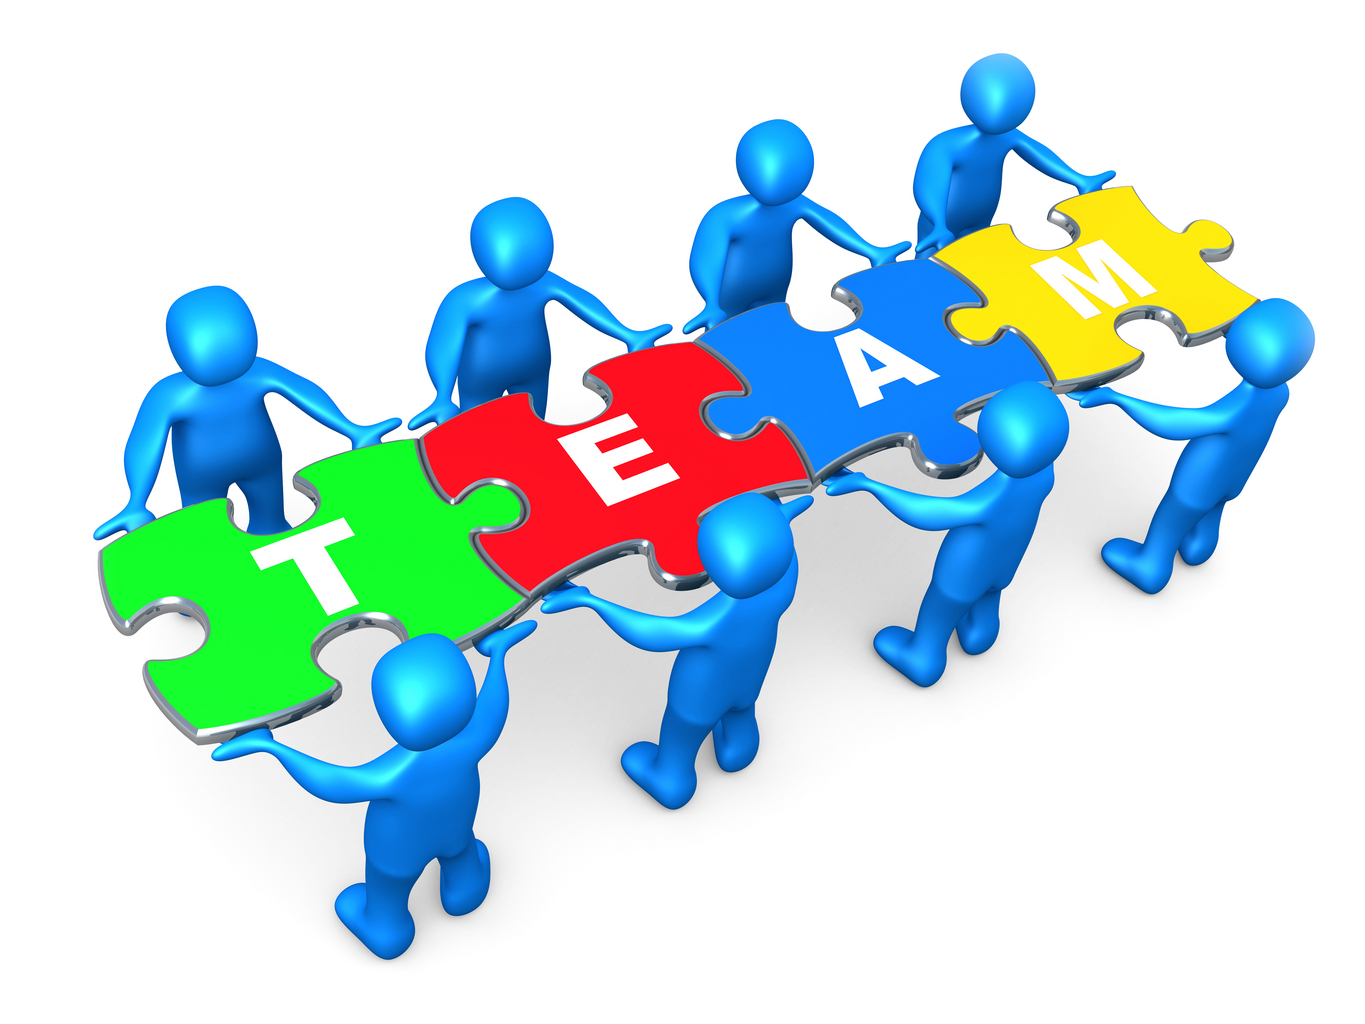 Free image of team. Discussion clipart group conflict